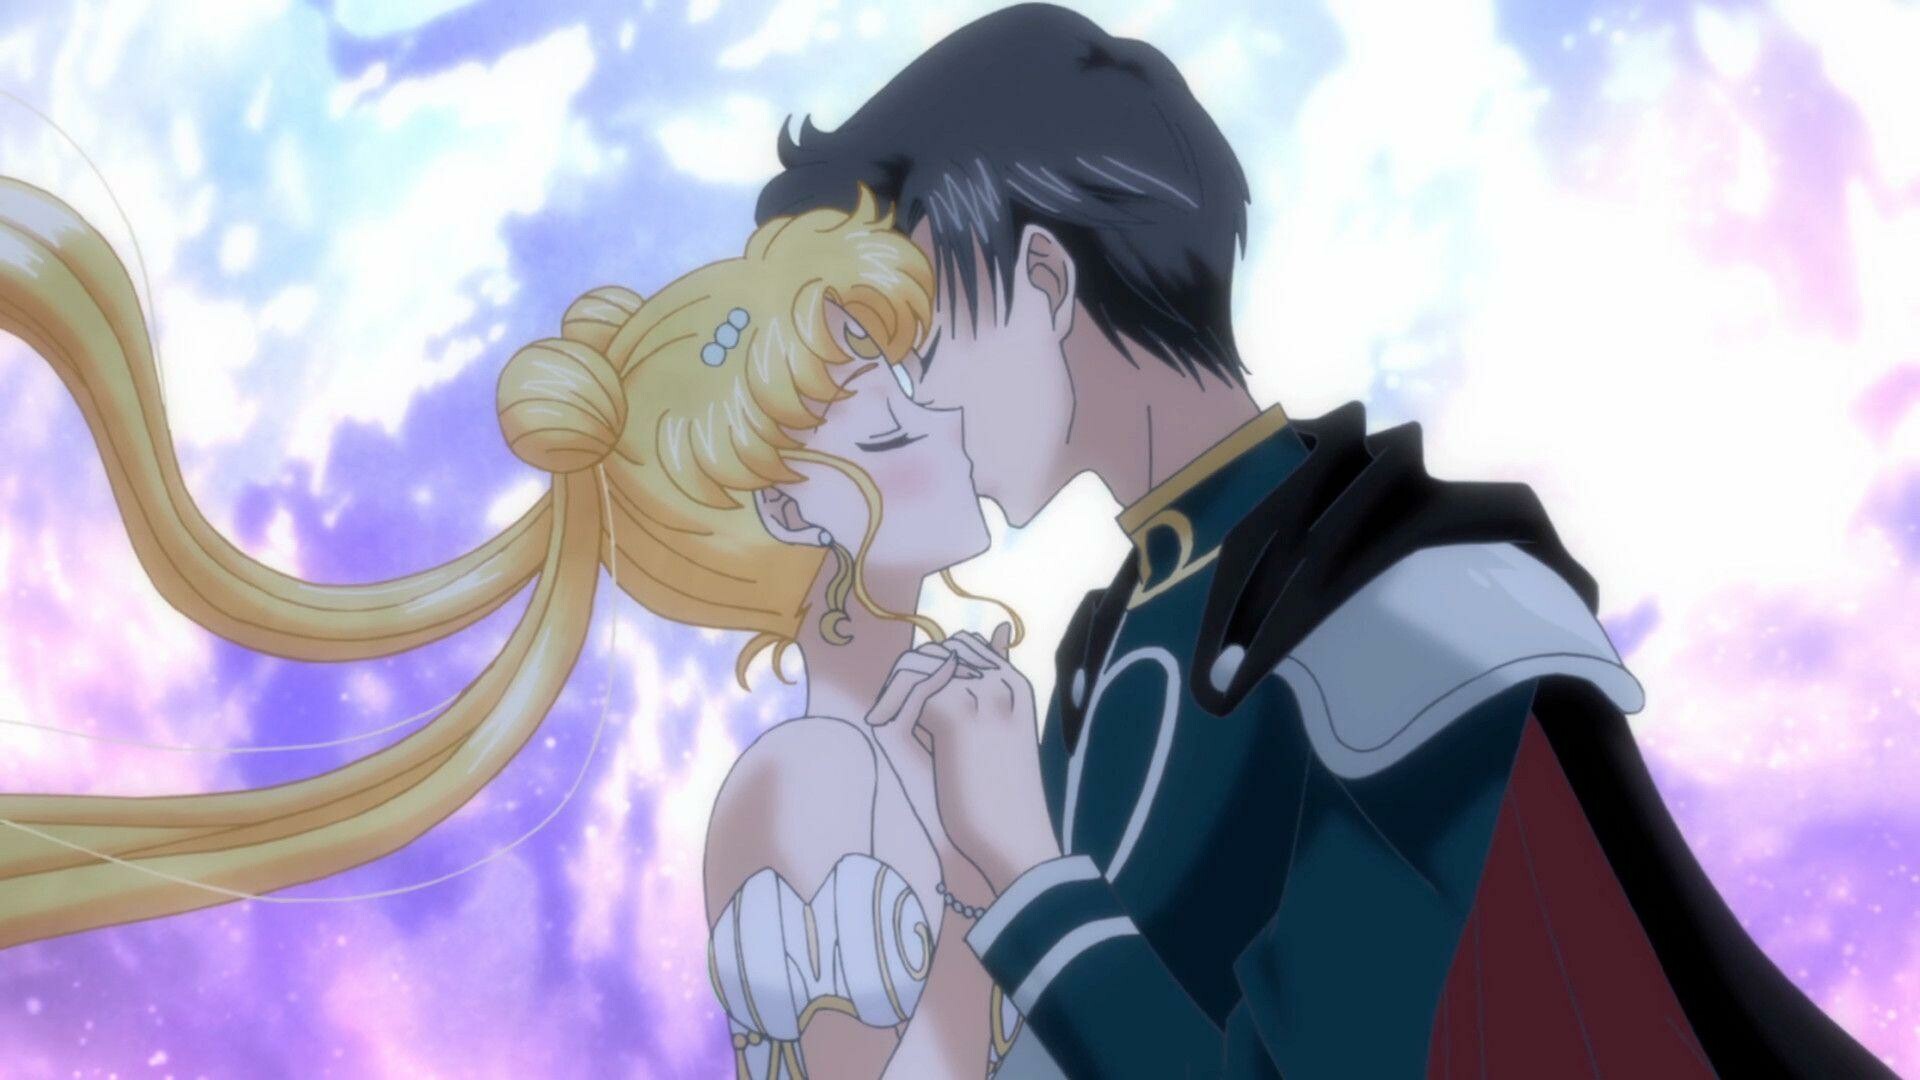 Sailor Moon Eternal: A 2021 Japanese two-part animated action fantasy film. 1920x1080 Full HD Background.